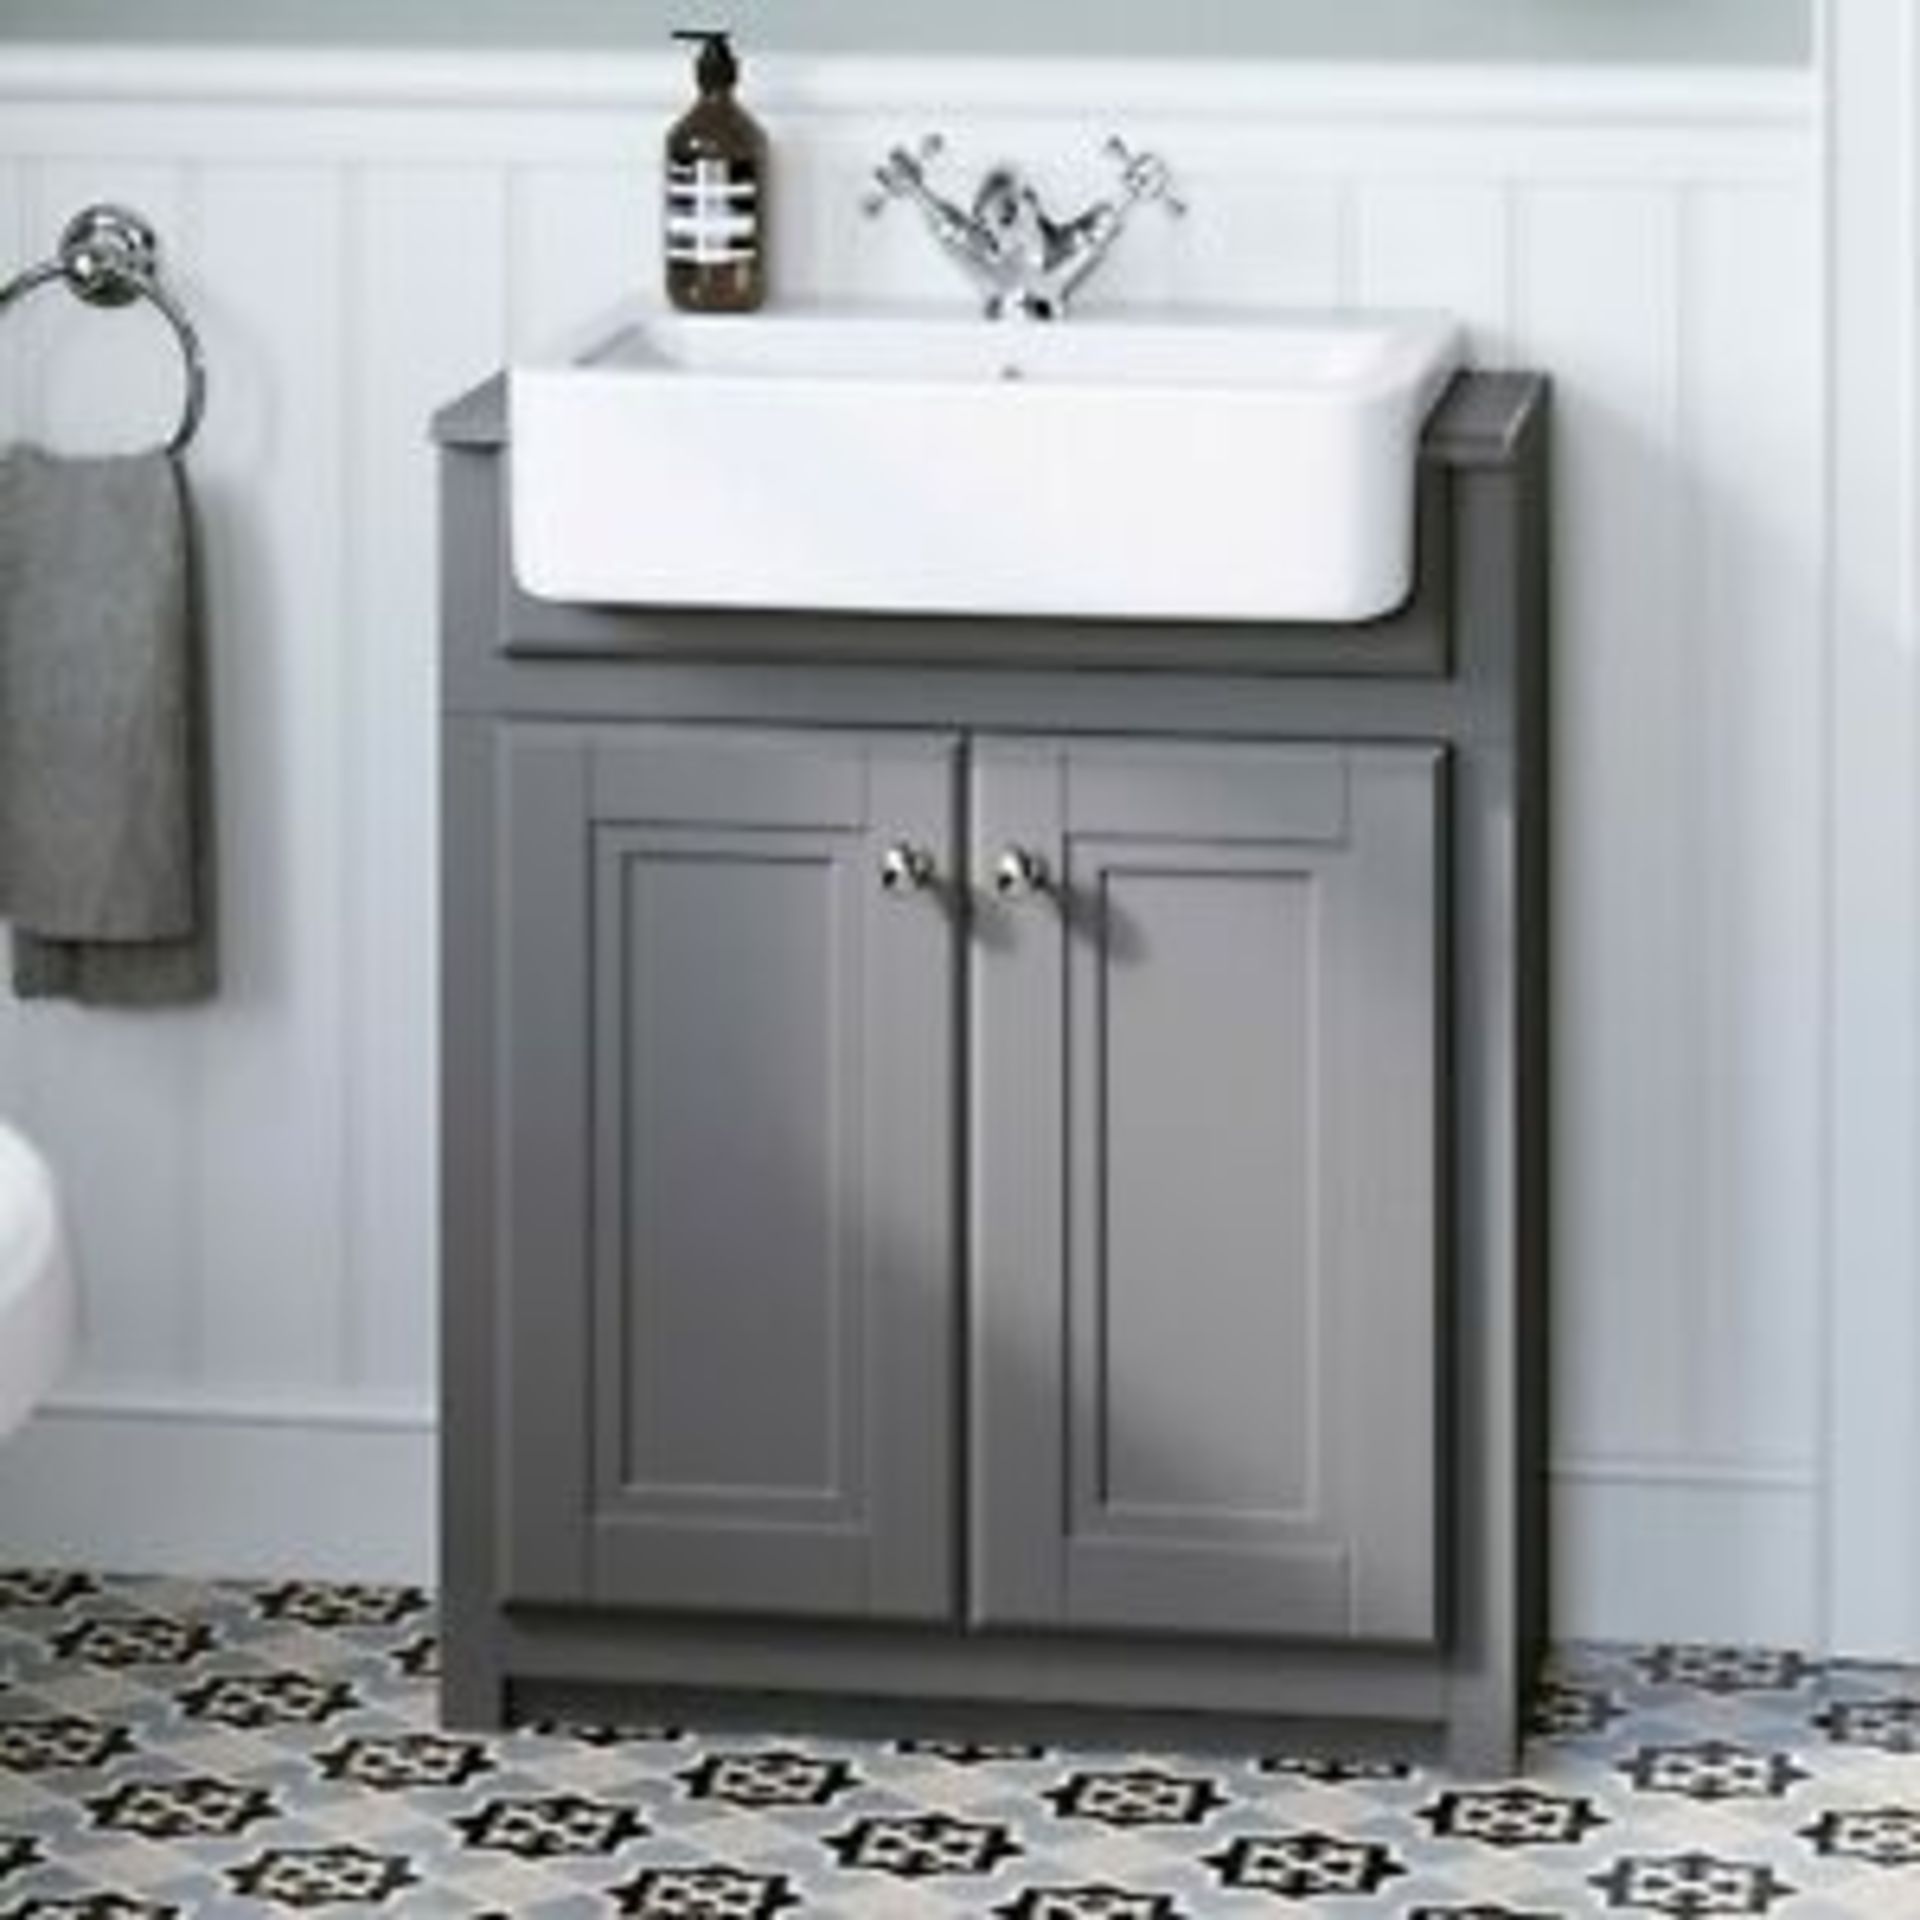 NEW & BOXED 667mm Midnight Grey FloorStanding Sink Vanity Unit. RRP £749.99.Comes complete wi... - Image 2 of 4